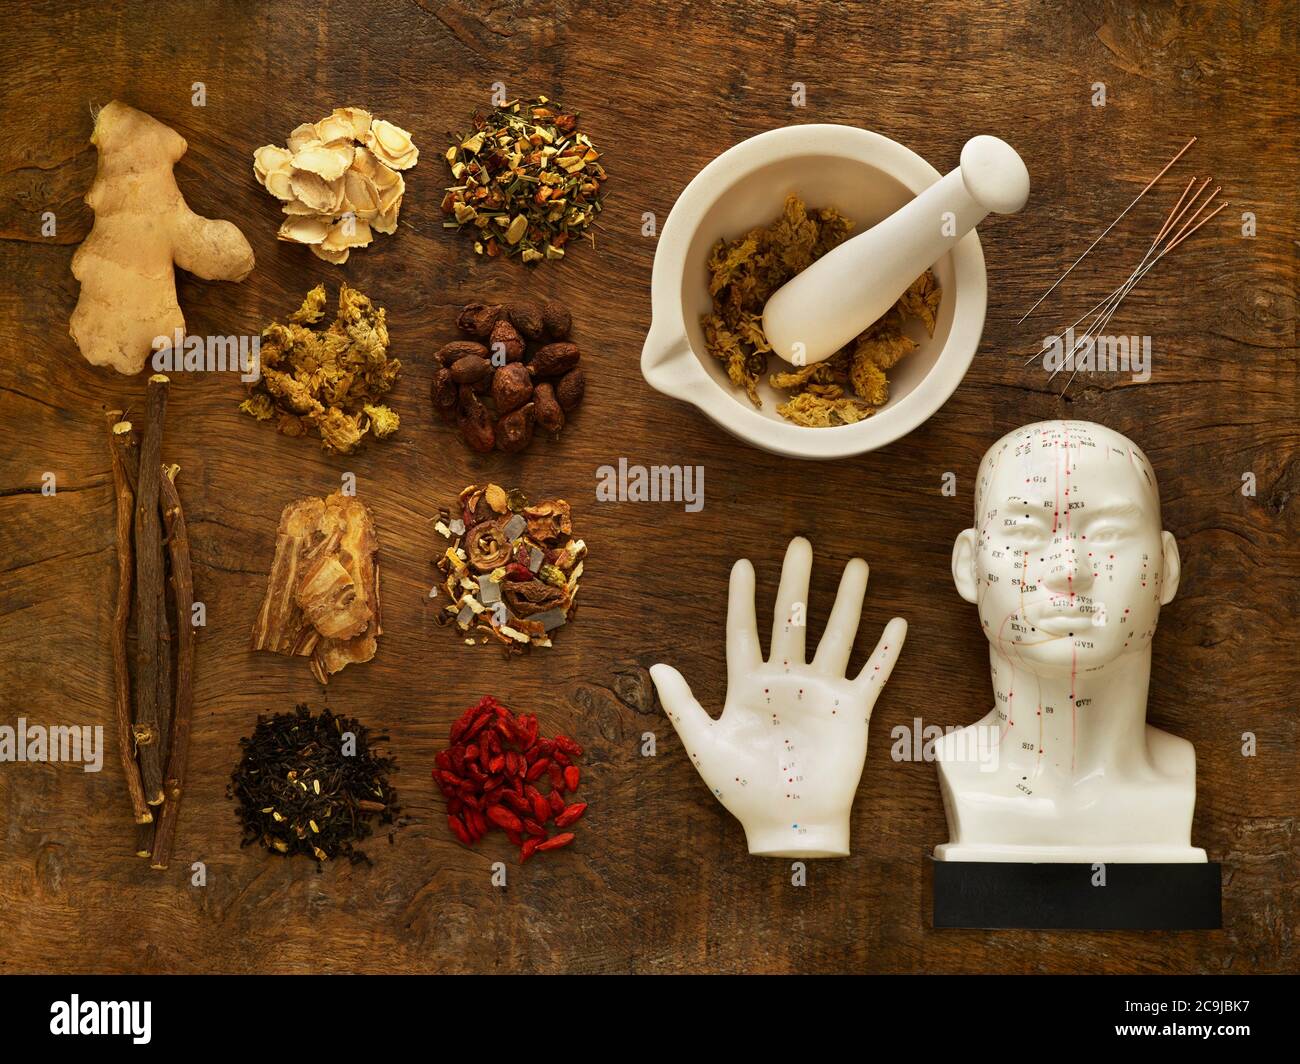 Herbs and equipment used for alternative medicine. Stock Photo